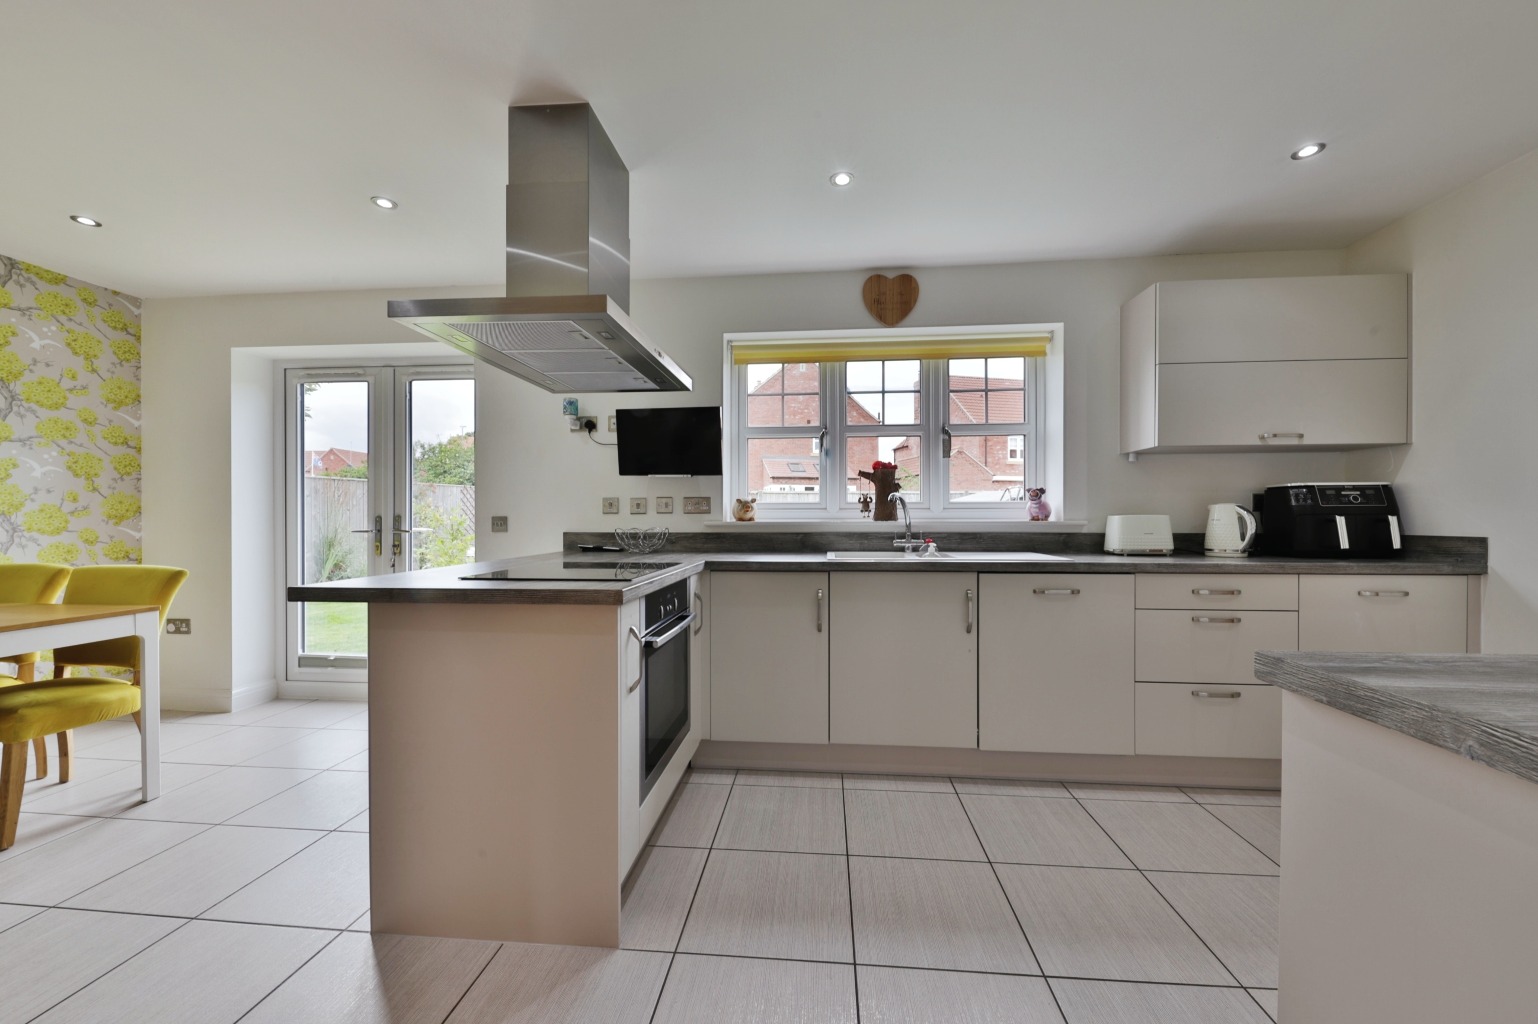 4 bed detached house for sale in Bells Fold, Brough - Property Image 1